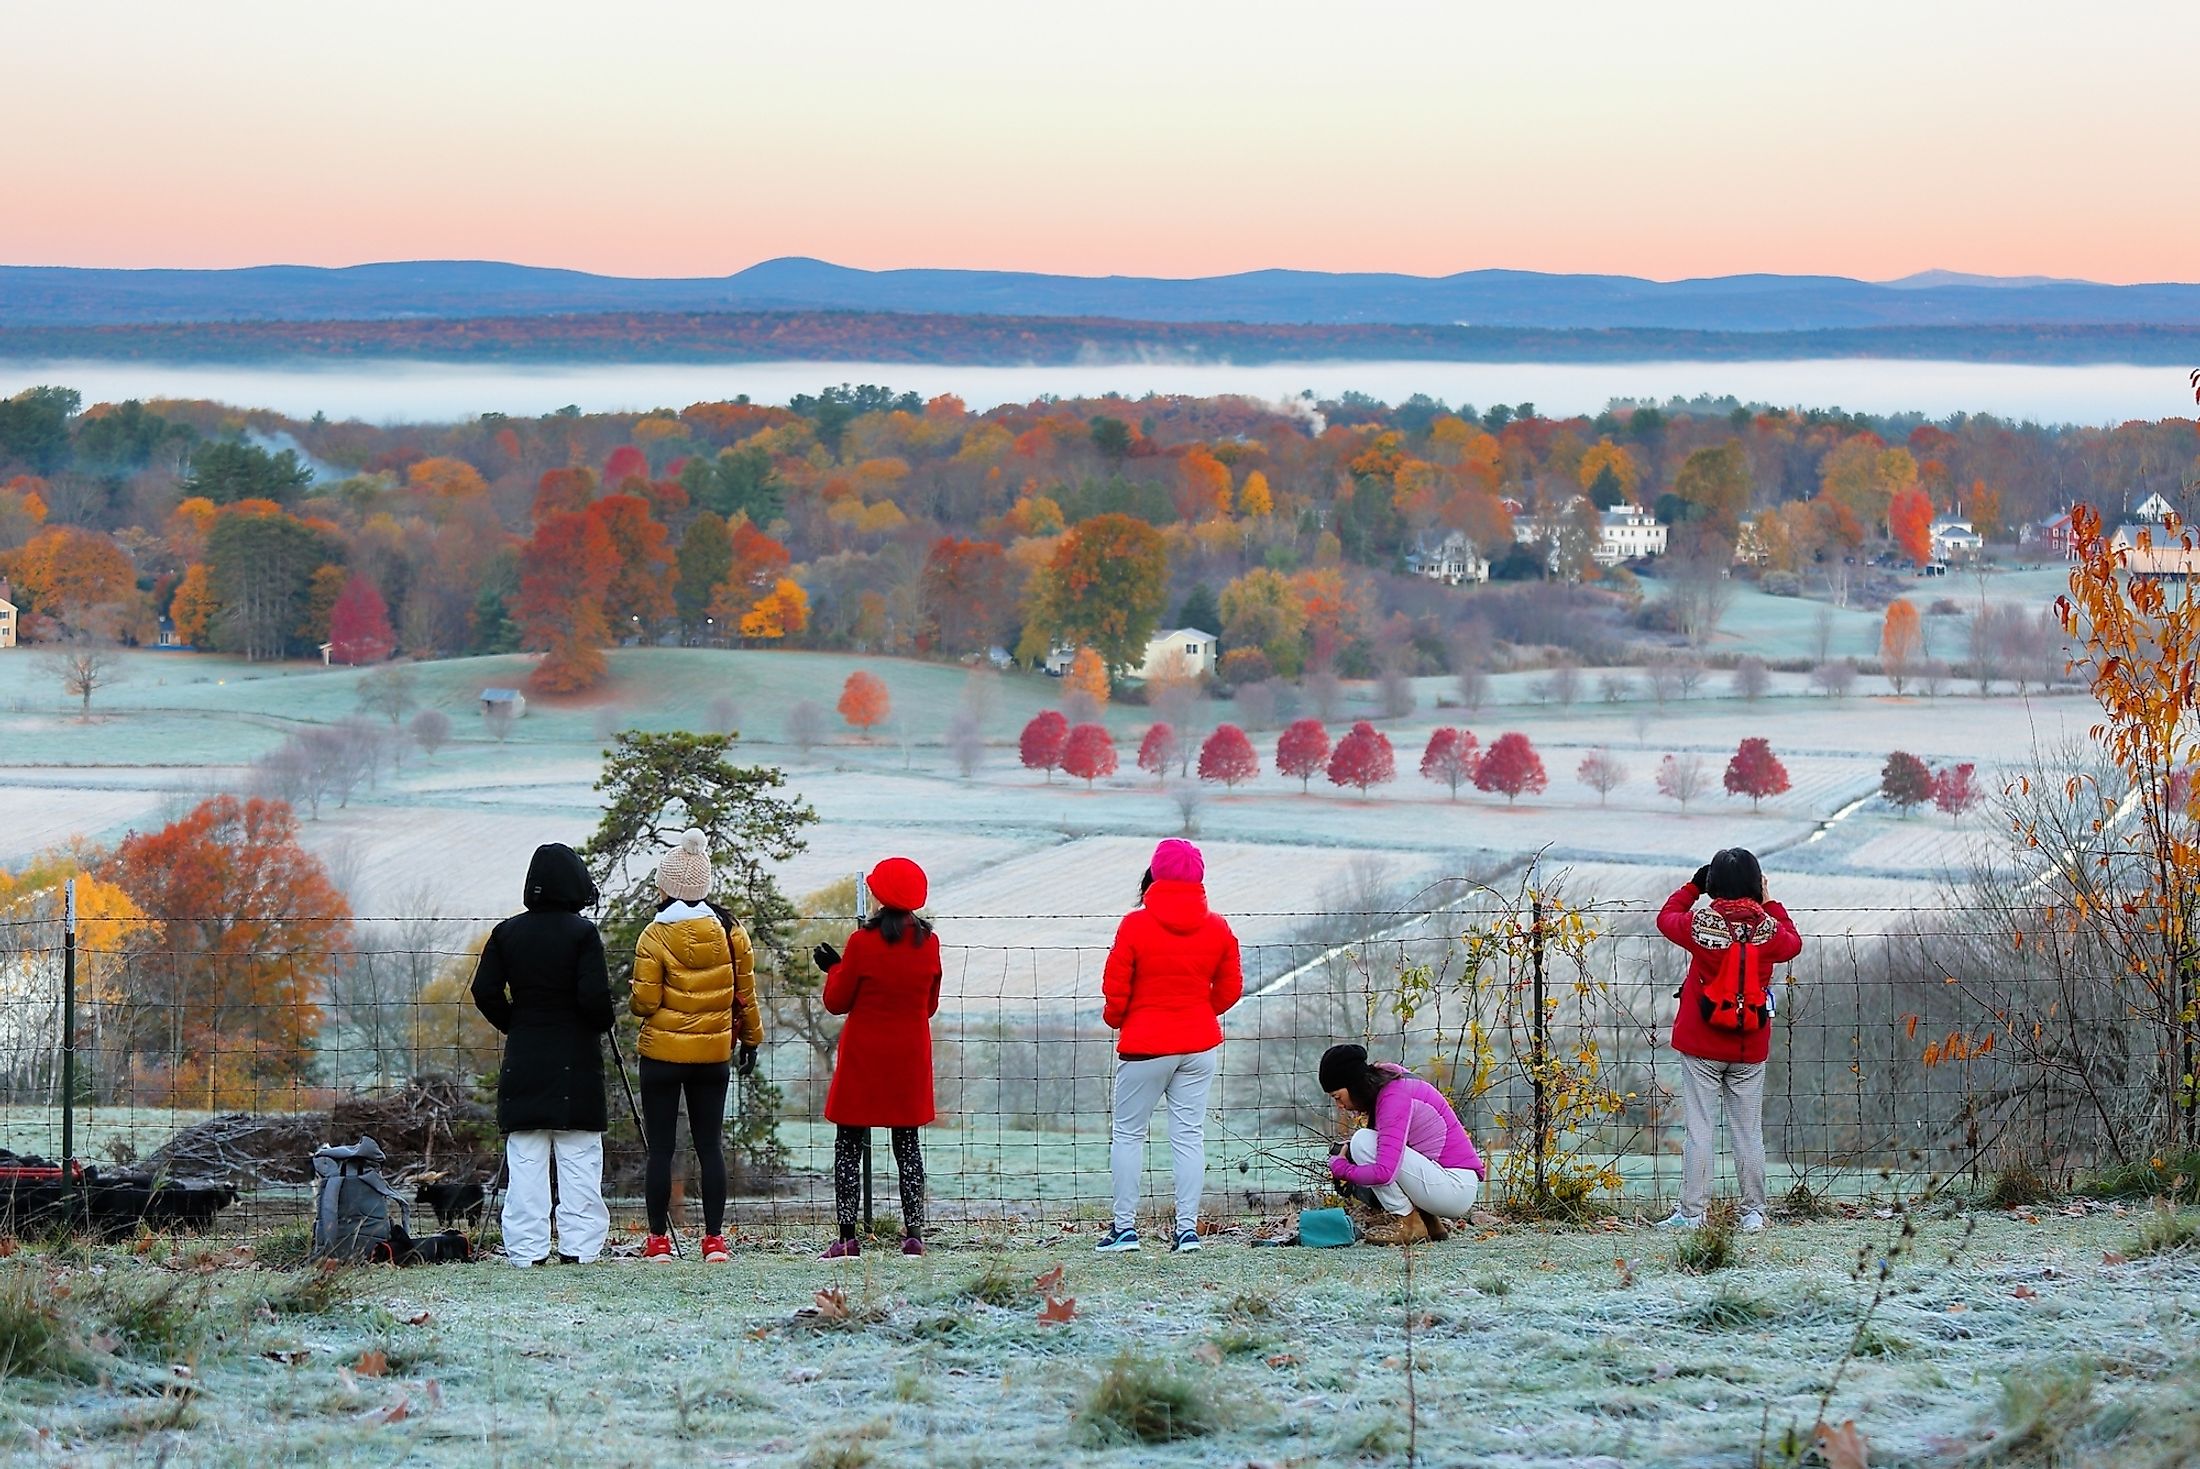 A group of tourists watching the sunrise at Bancroft's Castle View Point at Groton, Massachusetts.